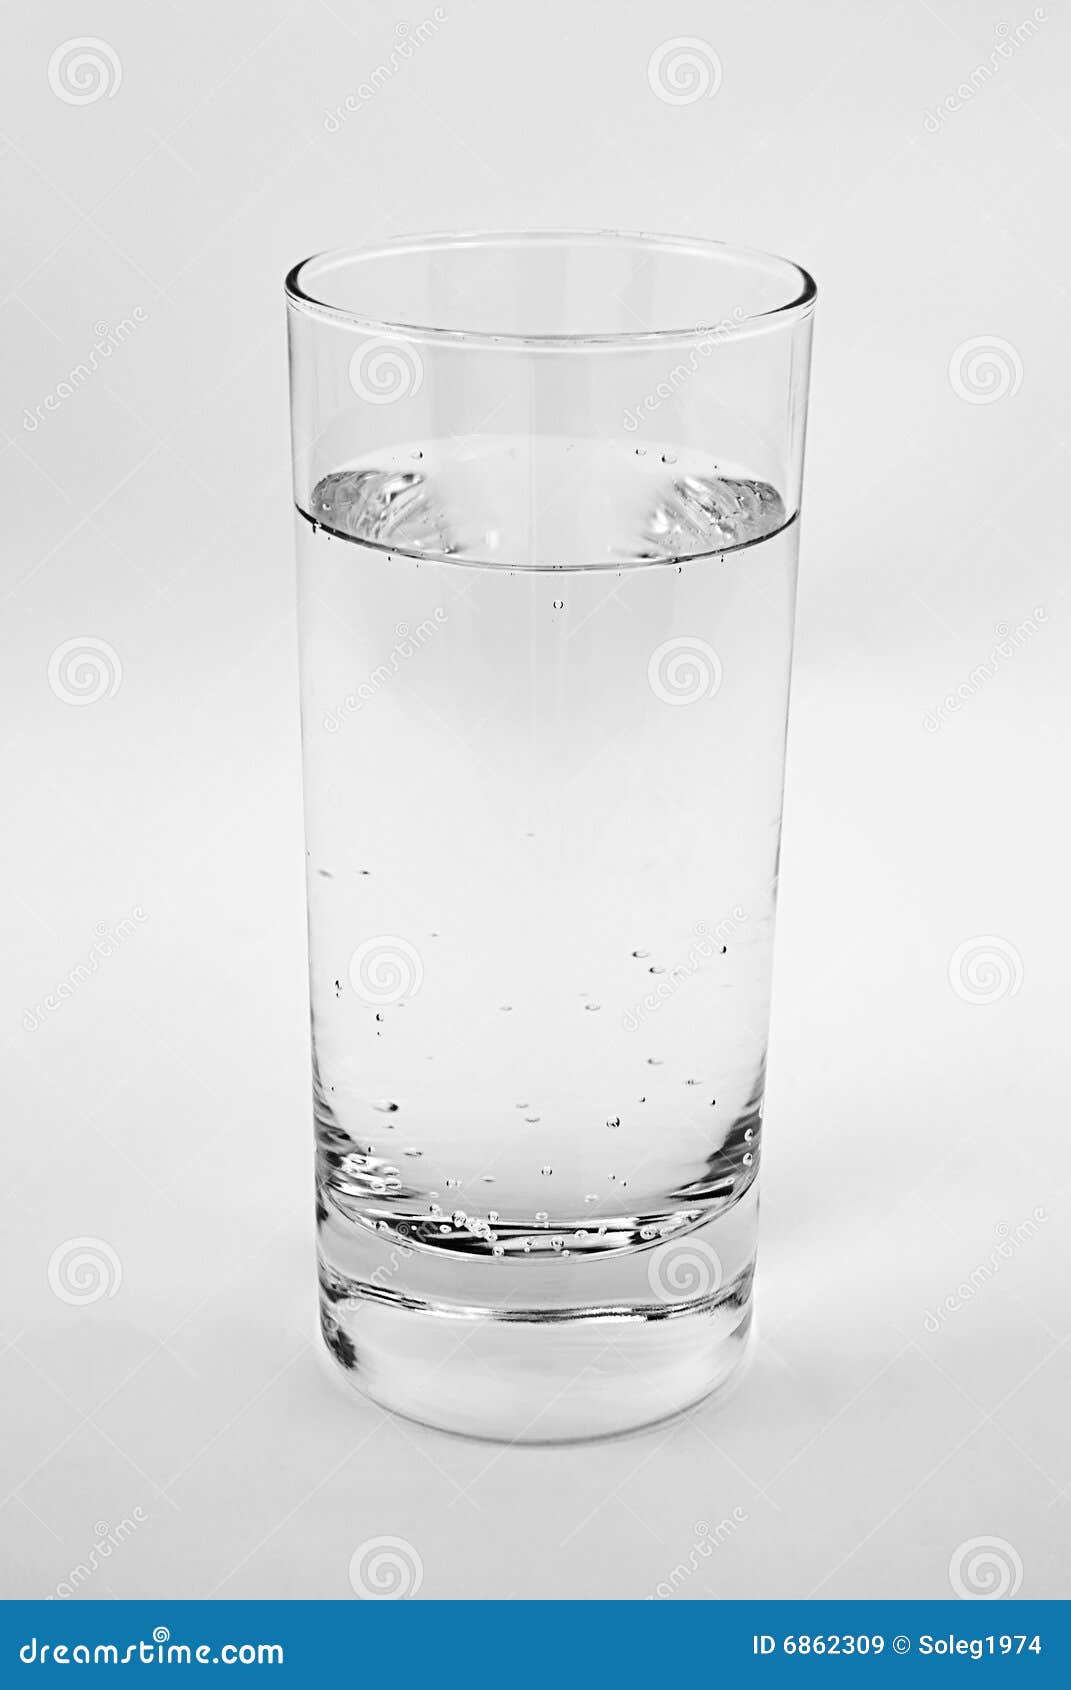 One Glass With Fresh Soda Water Stock Image Image of